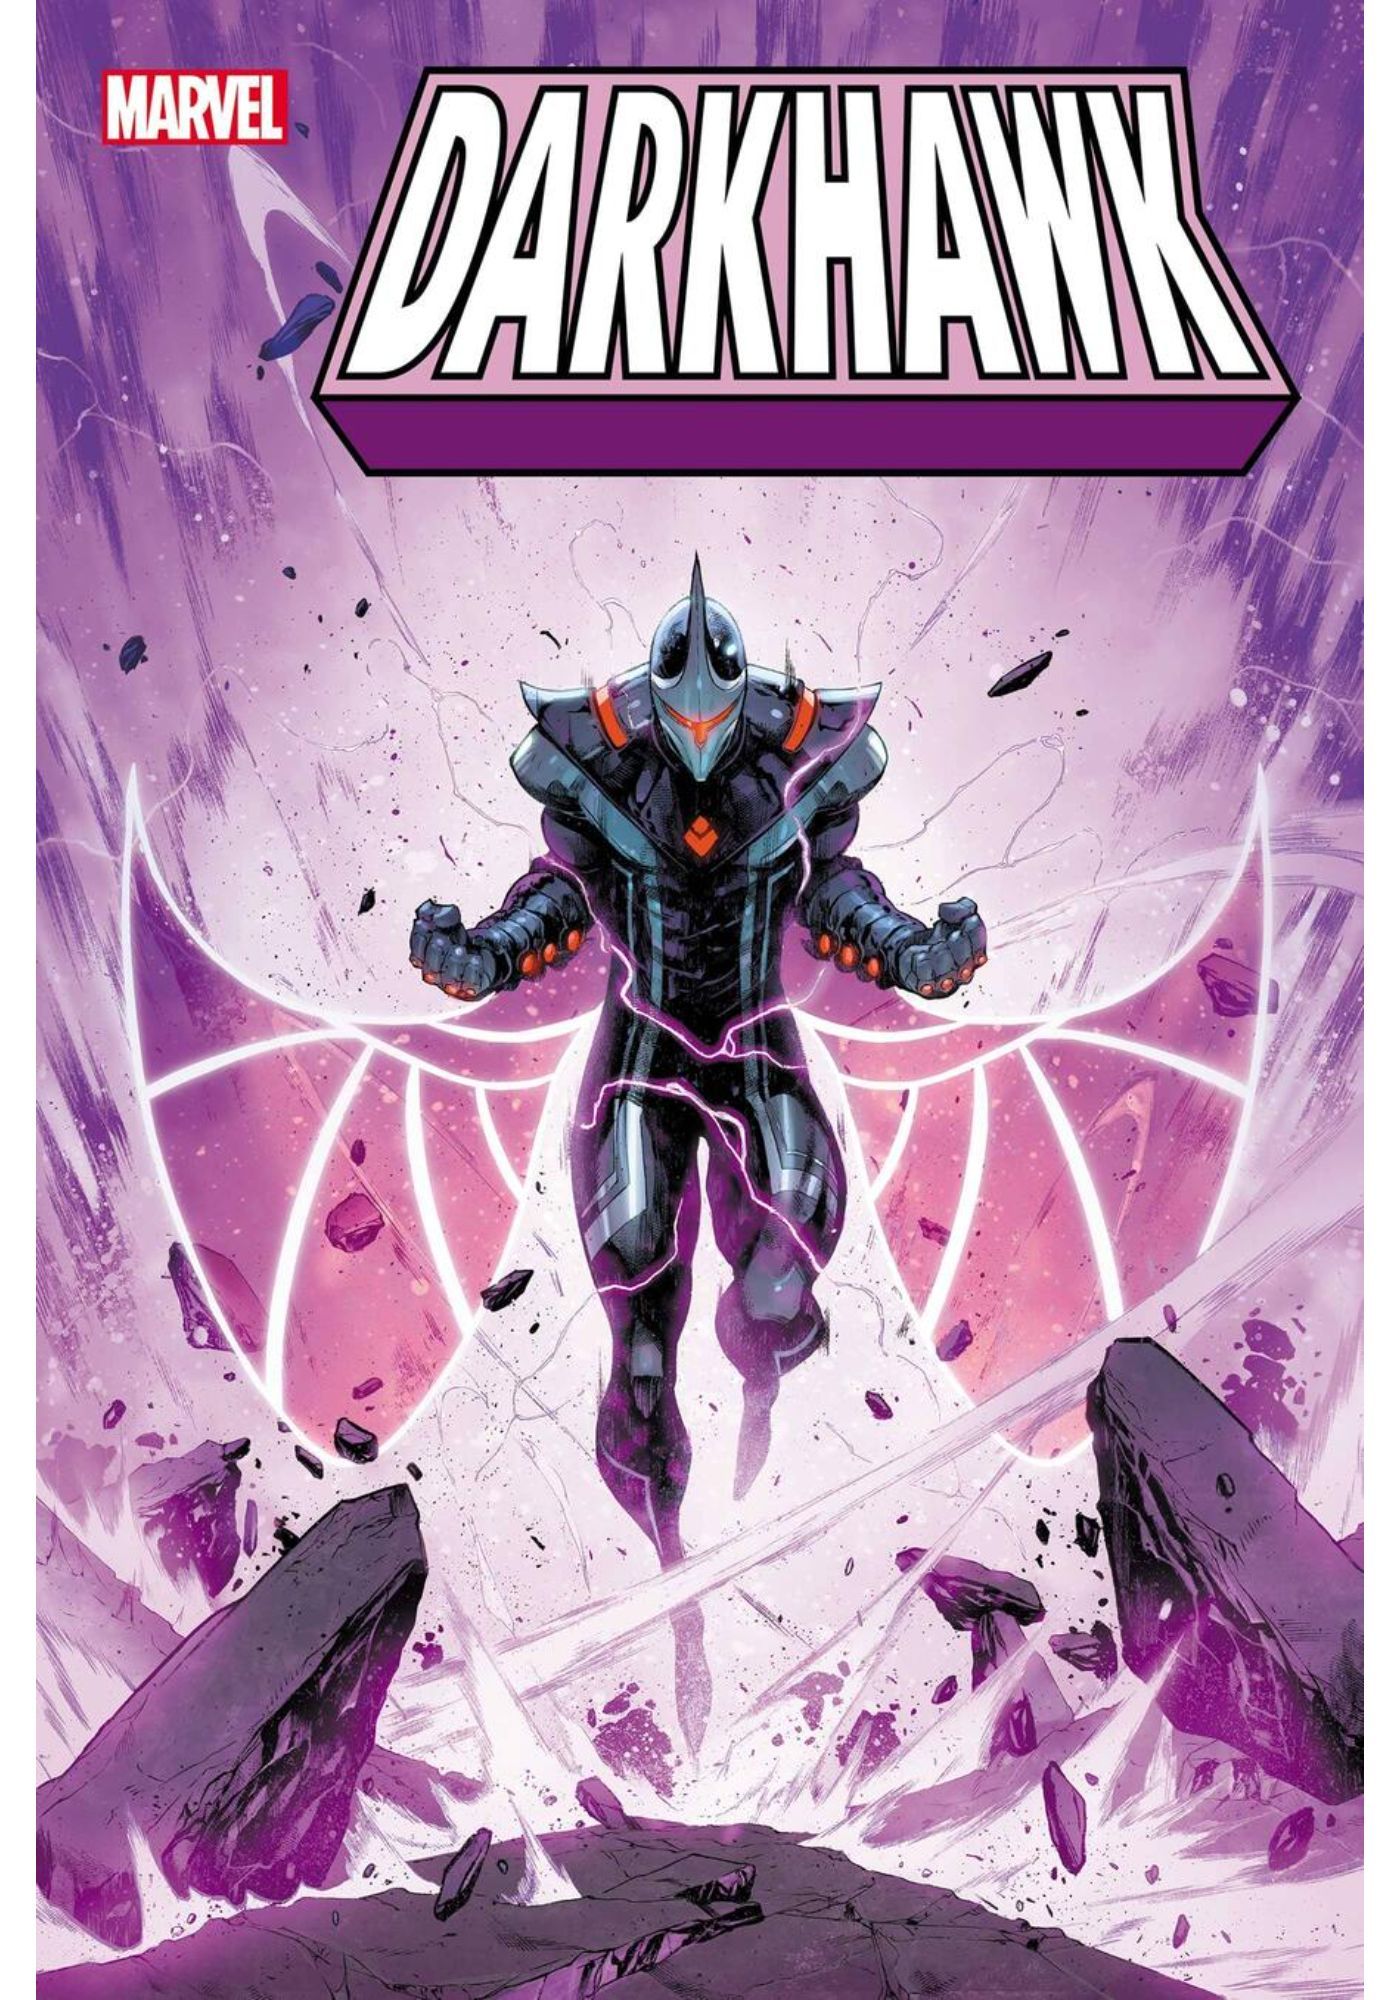 Marvels Most Advanced Armor Gets a Redesign in New Darkhawk Series